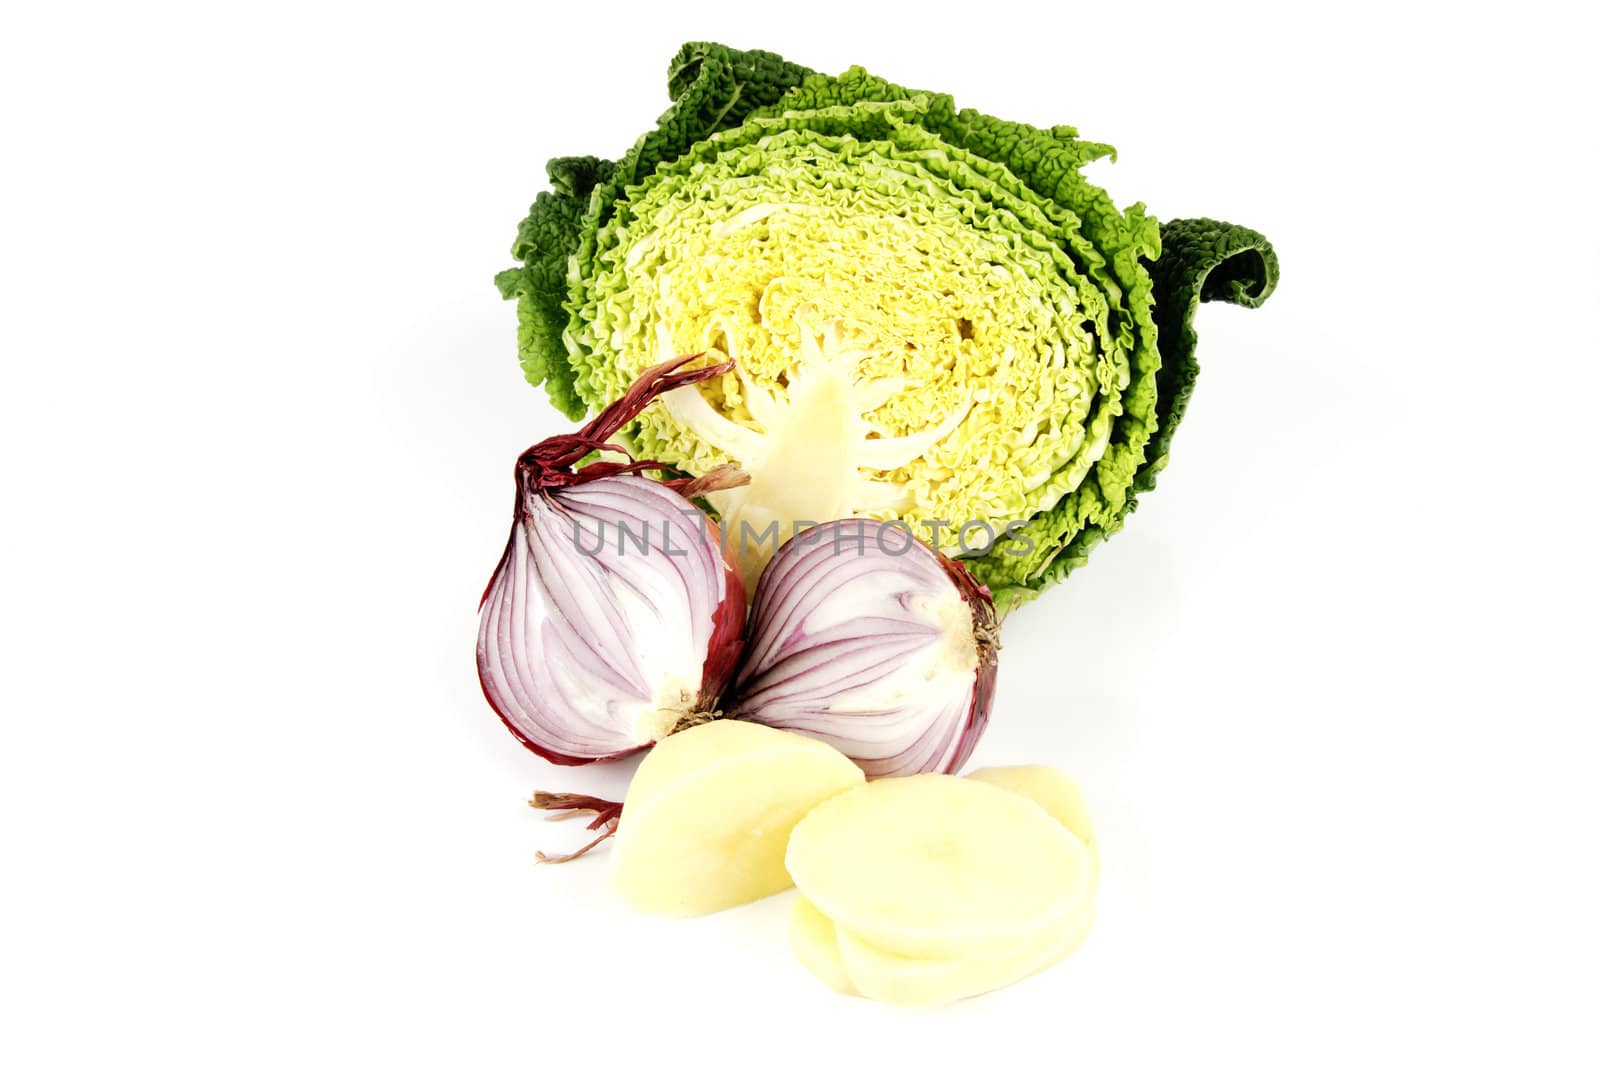 Half a raw green cabbage with a red onion cut in half and peeled potato slices on a reflective white background